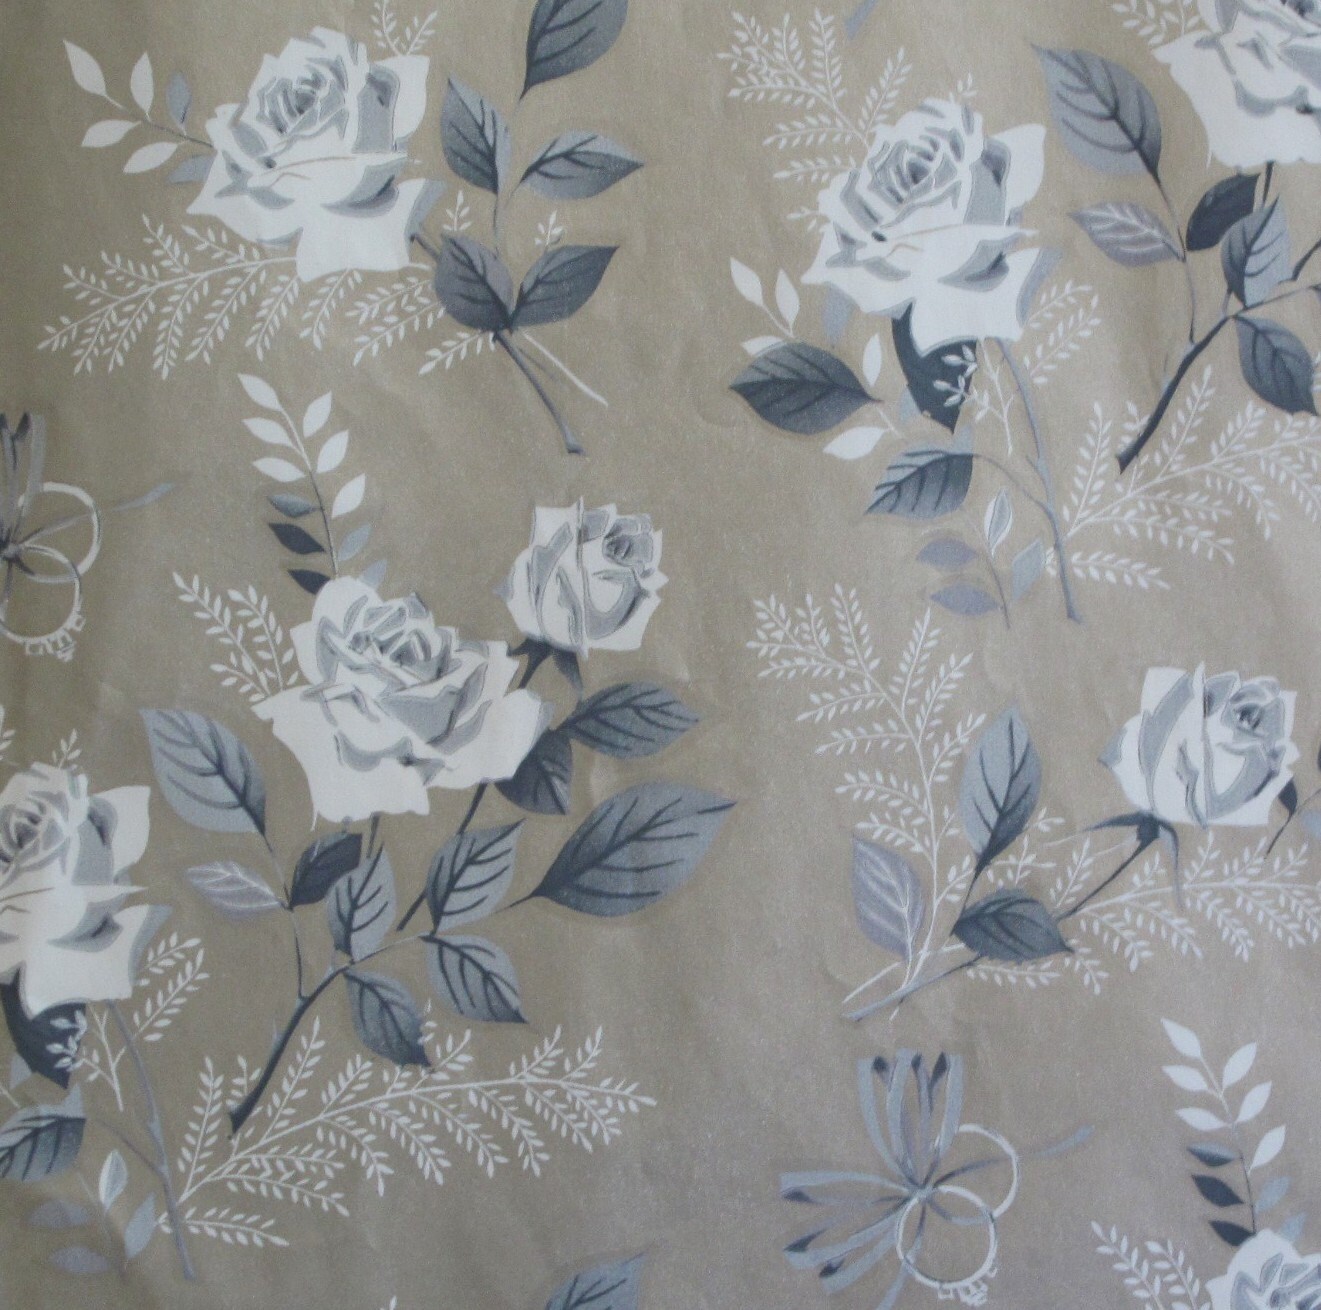 Vintage Laurel Wedding Gift Wrap Wrapping Paper White Roses